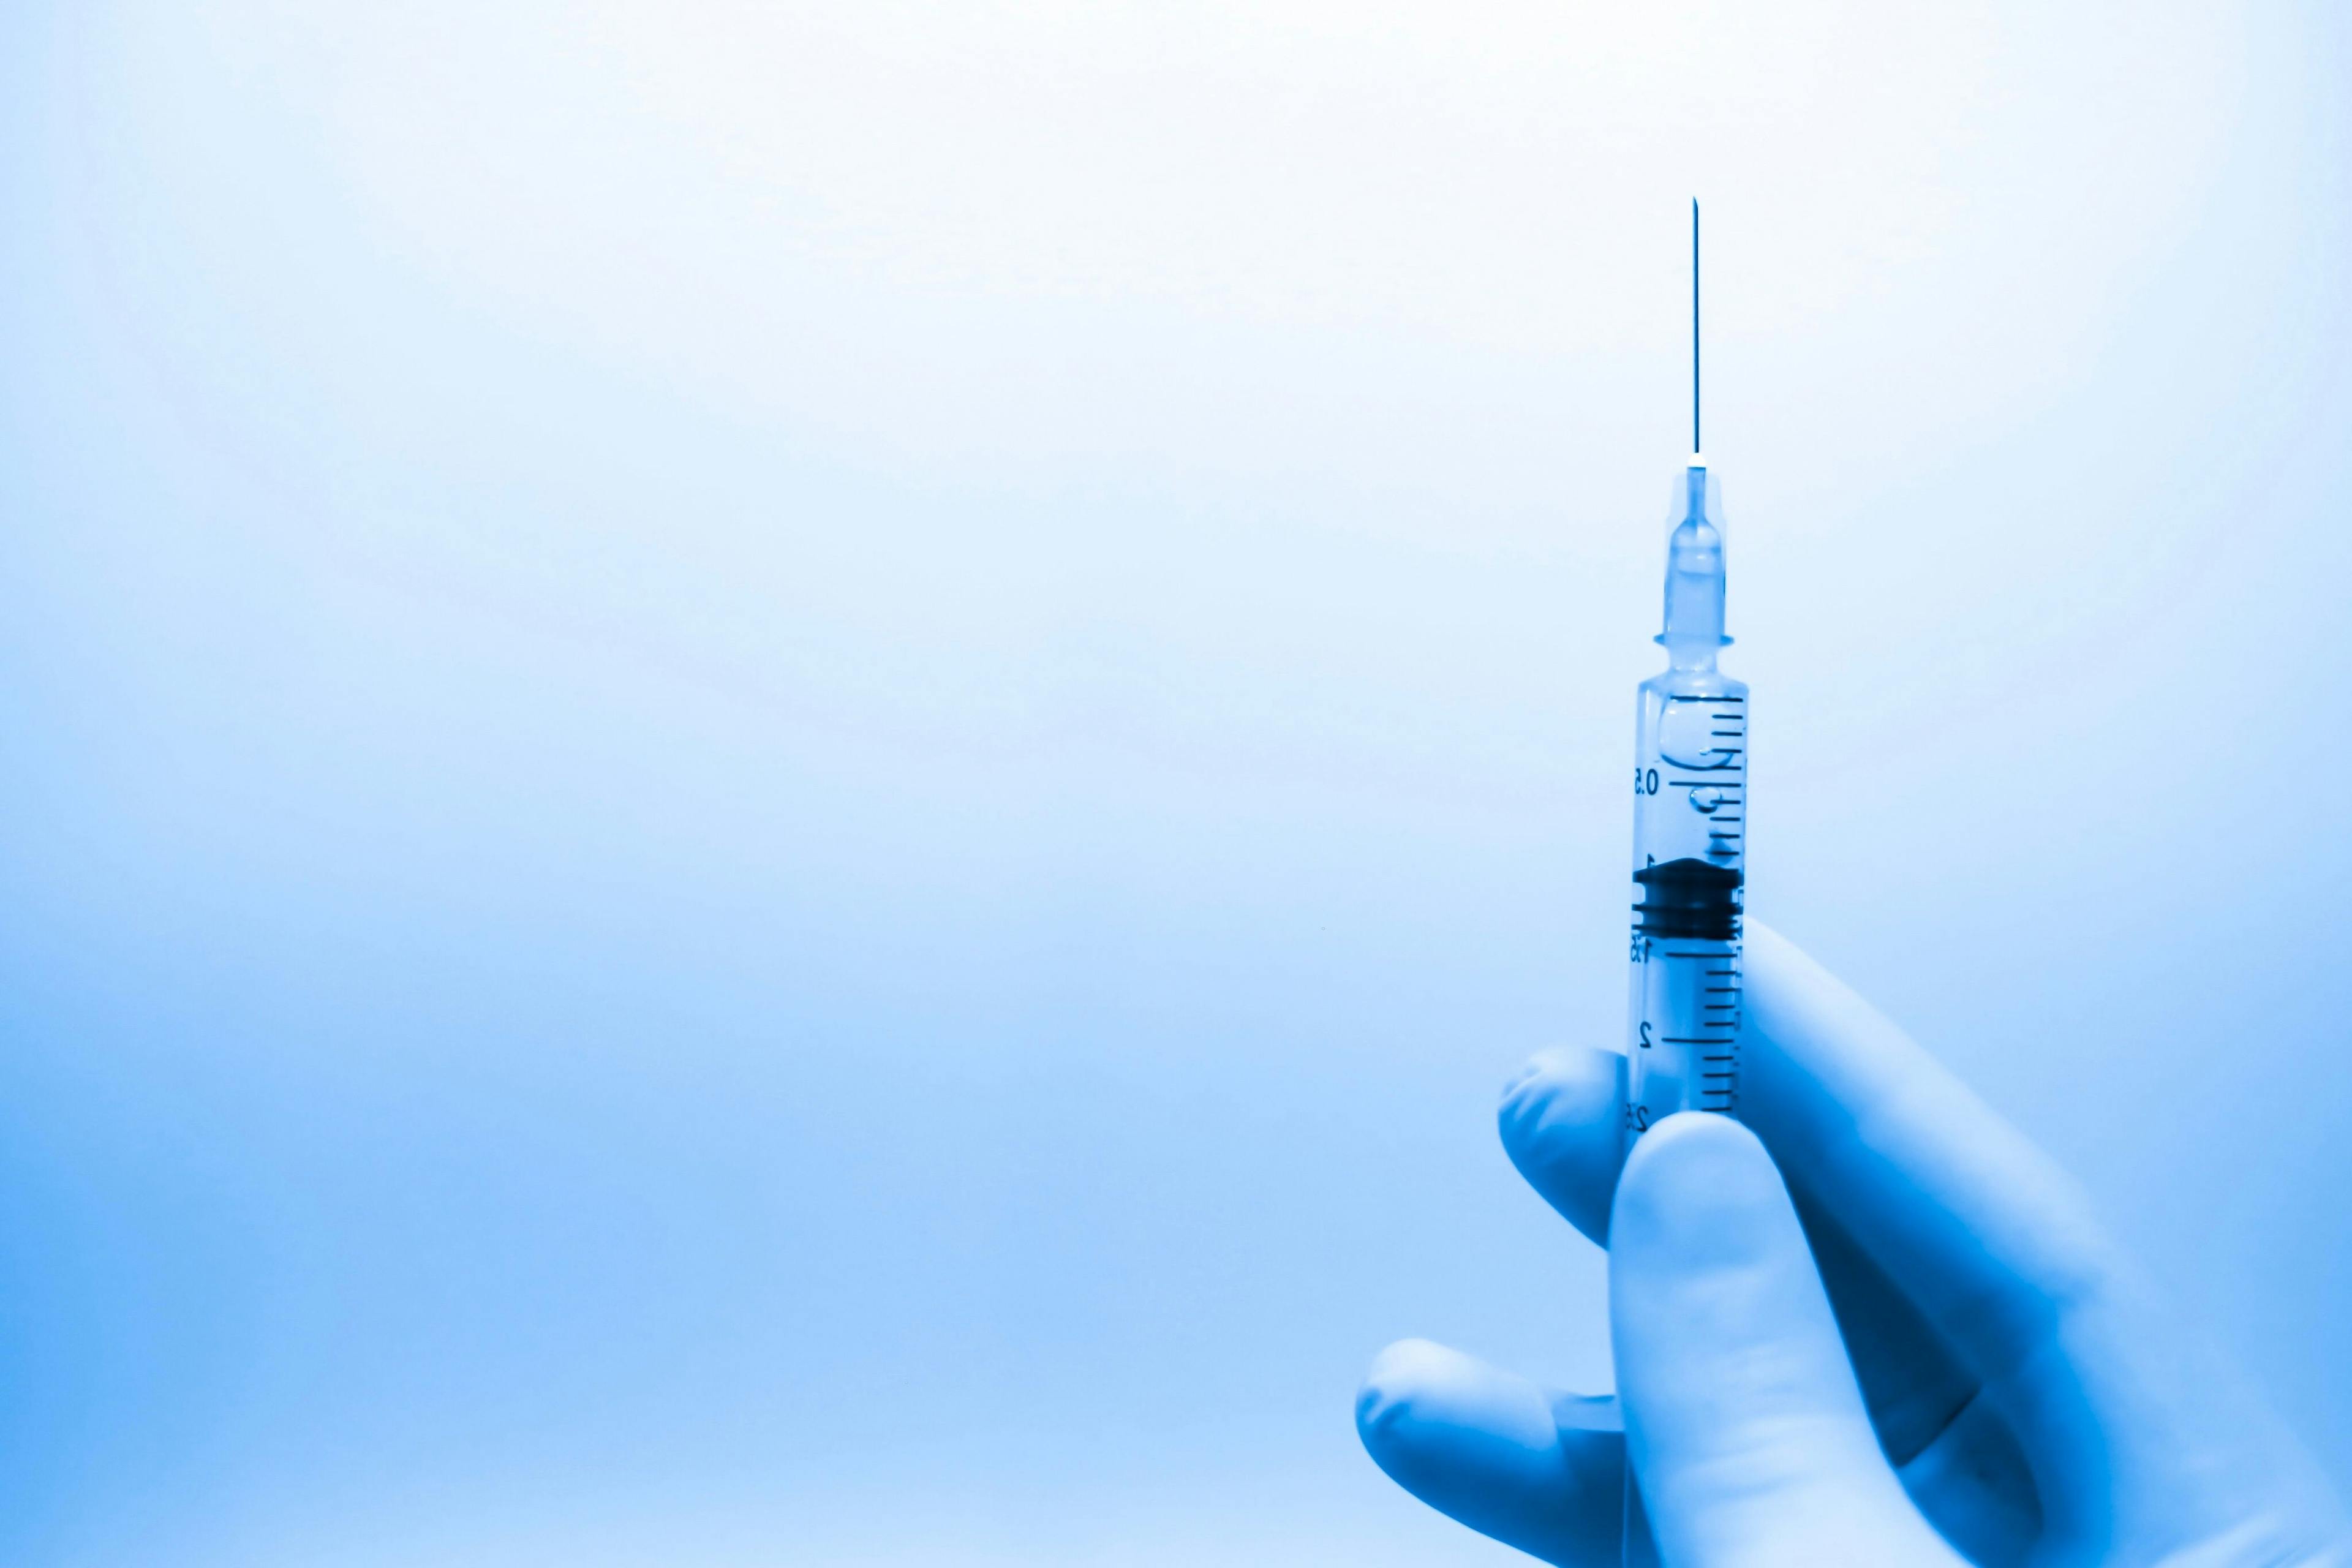 Fragmented Policy, Insurance Landscape Challenges Newly Approved Vaccines